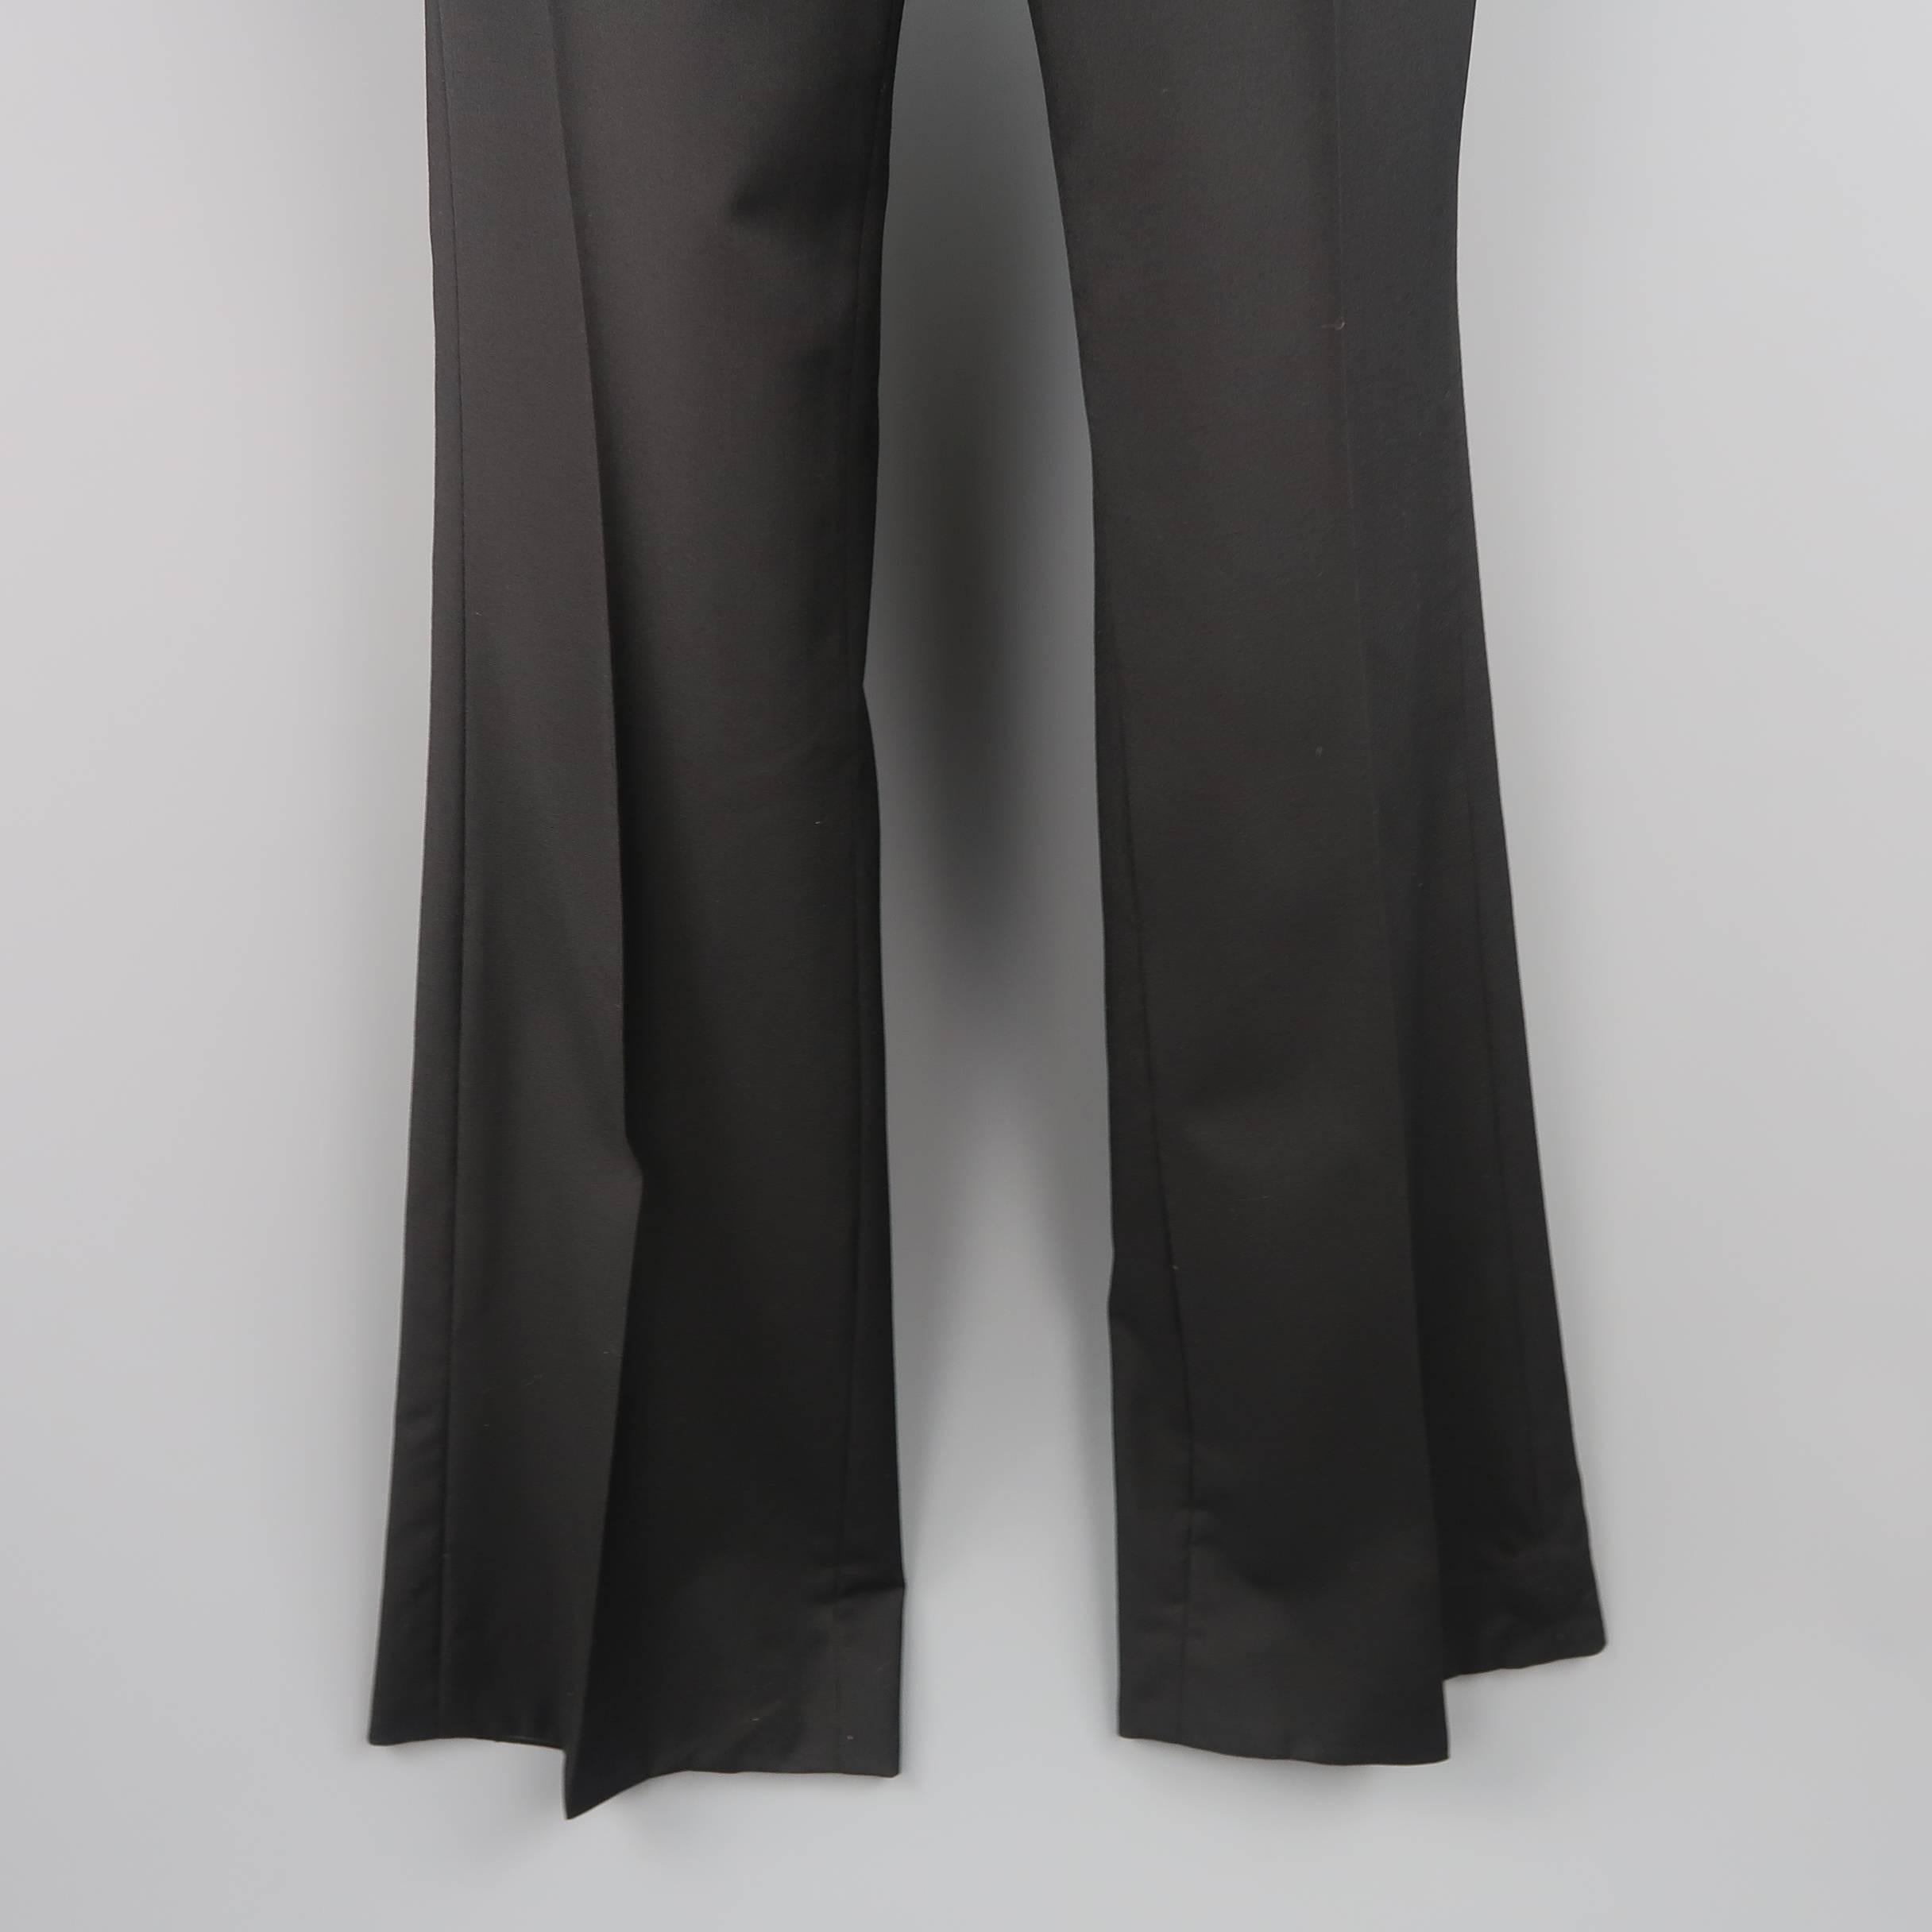 Rare GUCCI by TOM FORD Spring Summer 2000 dress pants come in black wool with a flat front and flaired bell bottom leg. Made in Italy.
 
Good Pre-Owned Condition.
Marked: IT 46 R
 
Measurements:
 
Waist: 31 in. (+1 in. )
Rise: 10.5 in.
Inseam: 35